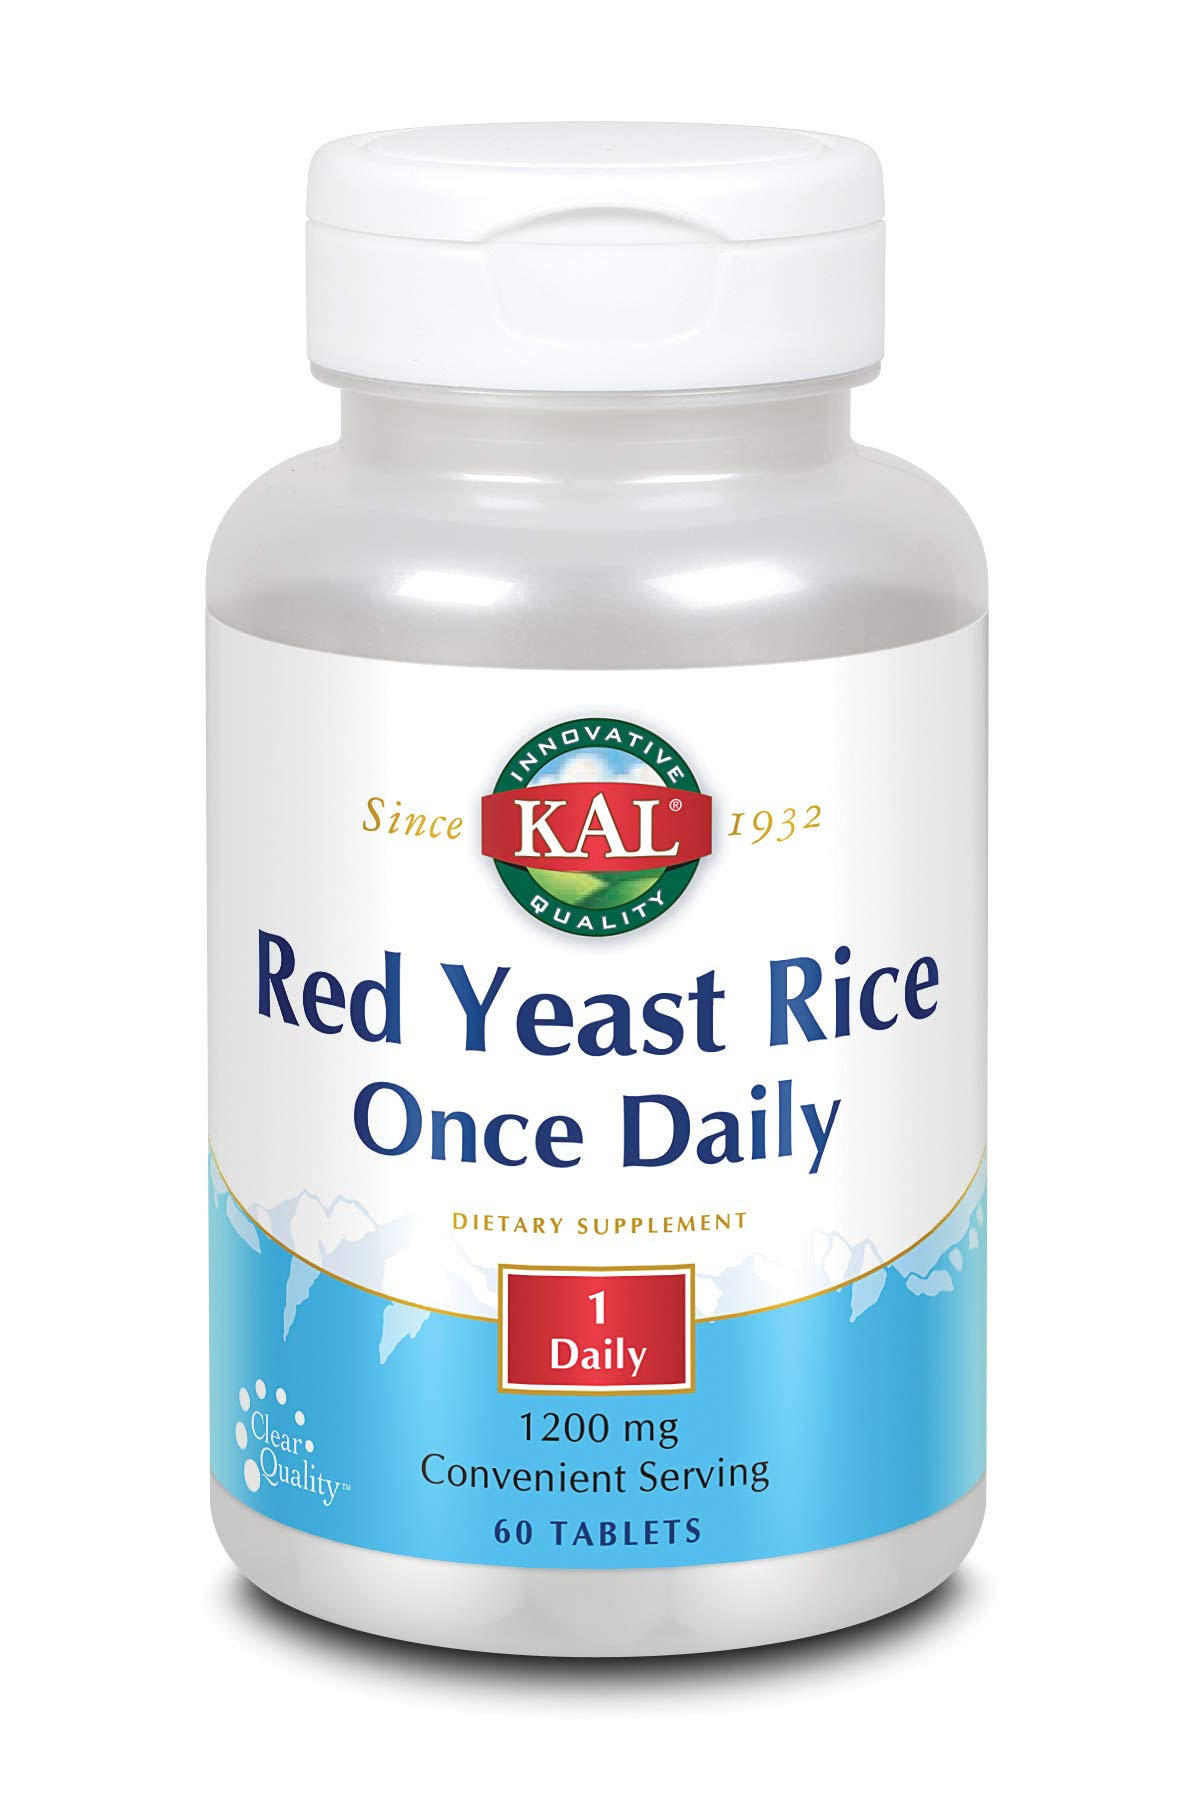 Kal Once Daily Red Yeast Rice Dietary Supplement - 60 Tablets